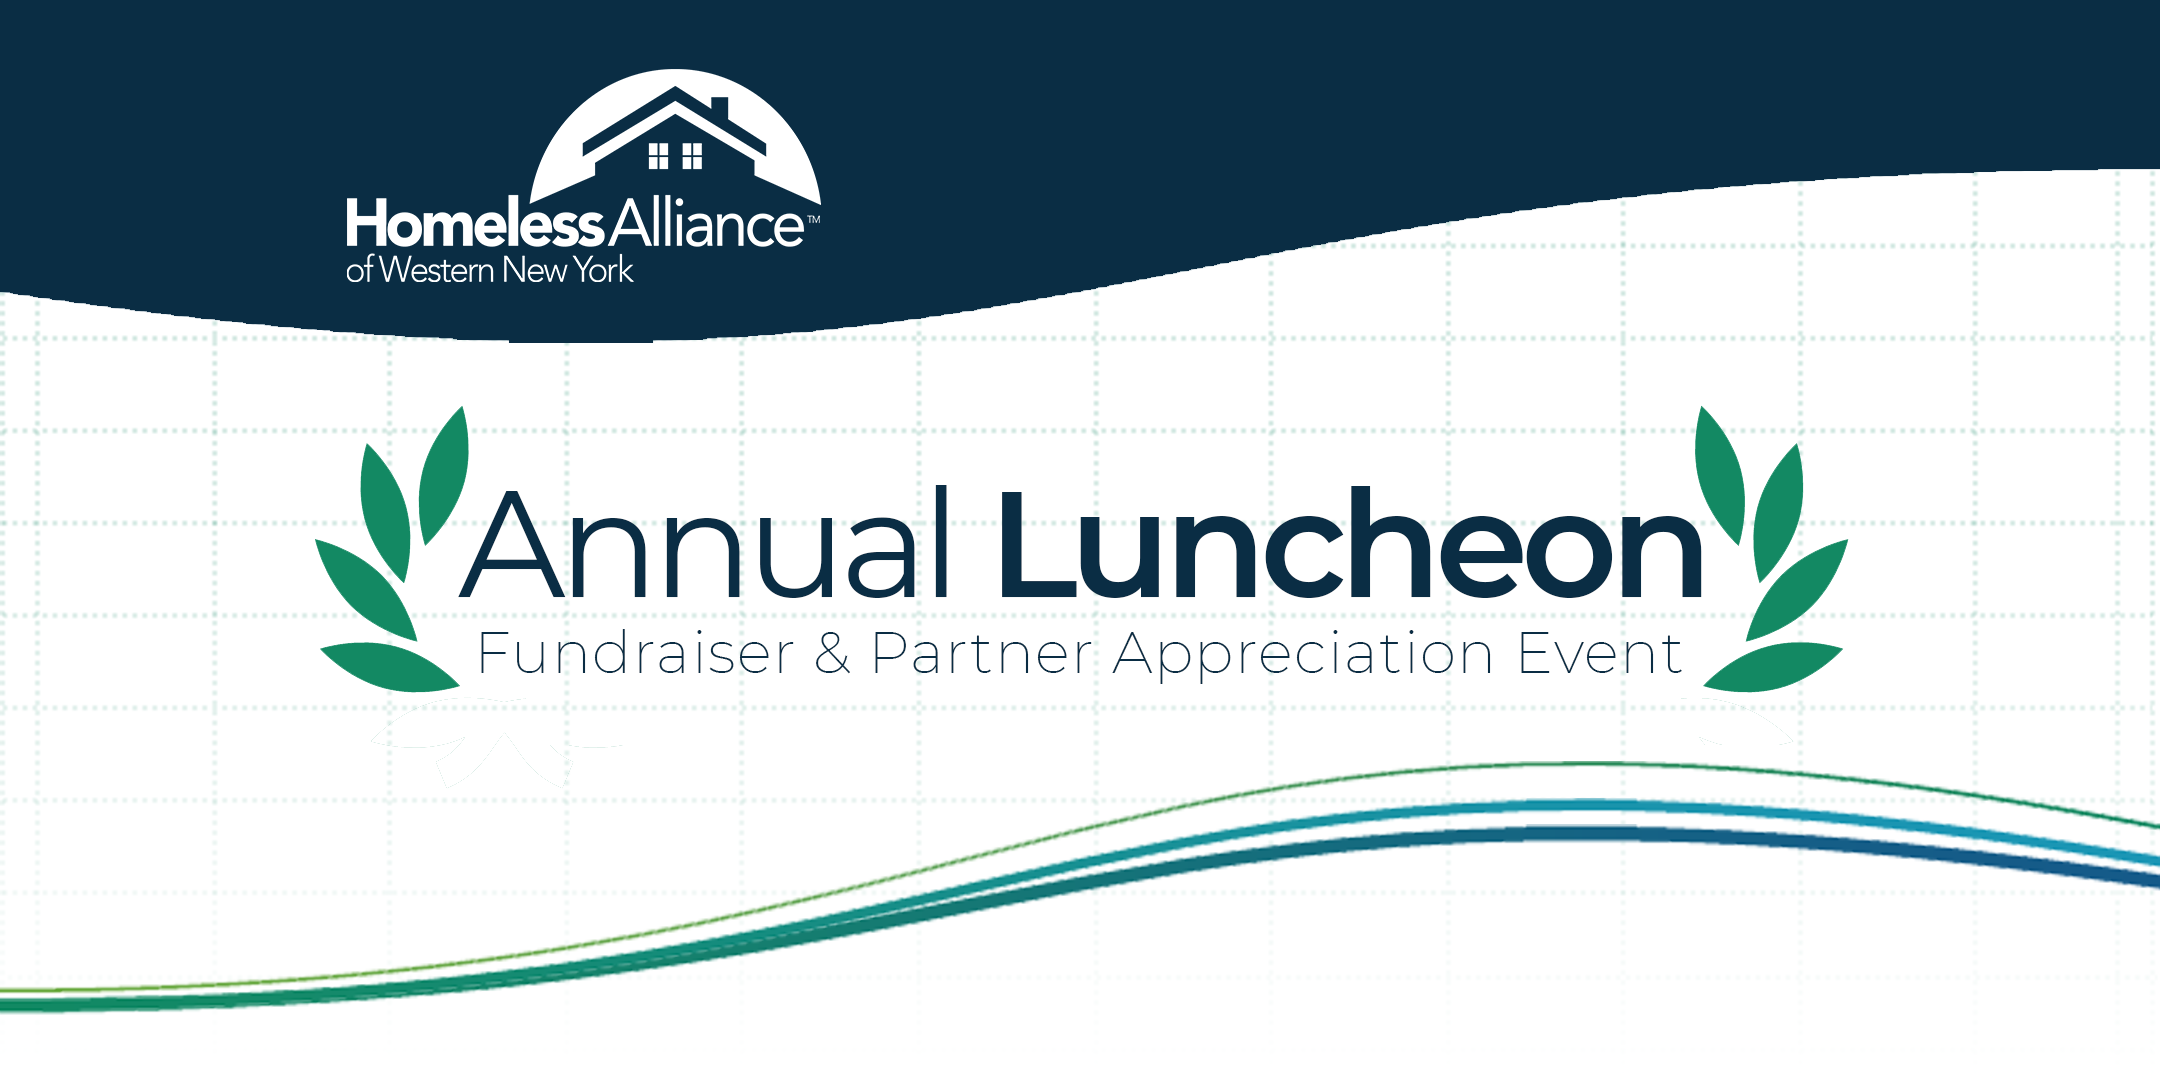 Annual Luncheon, Fundraiser and Partner Appreciation event